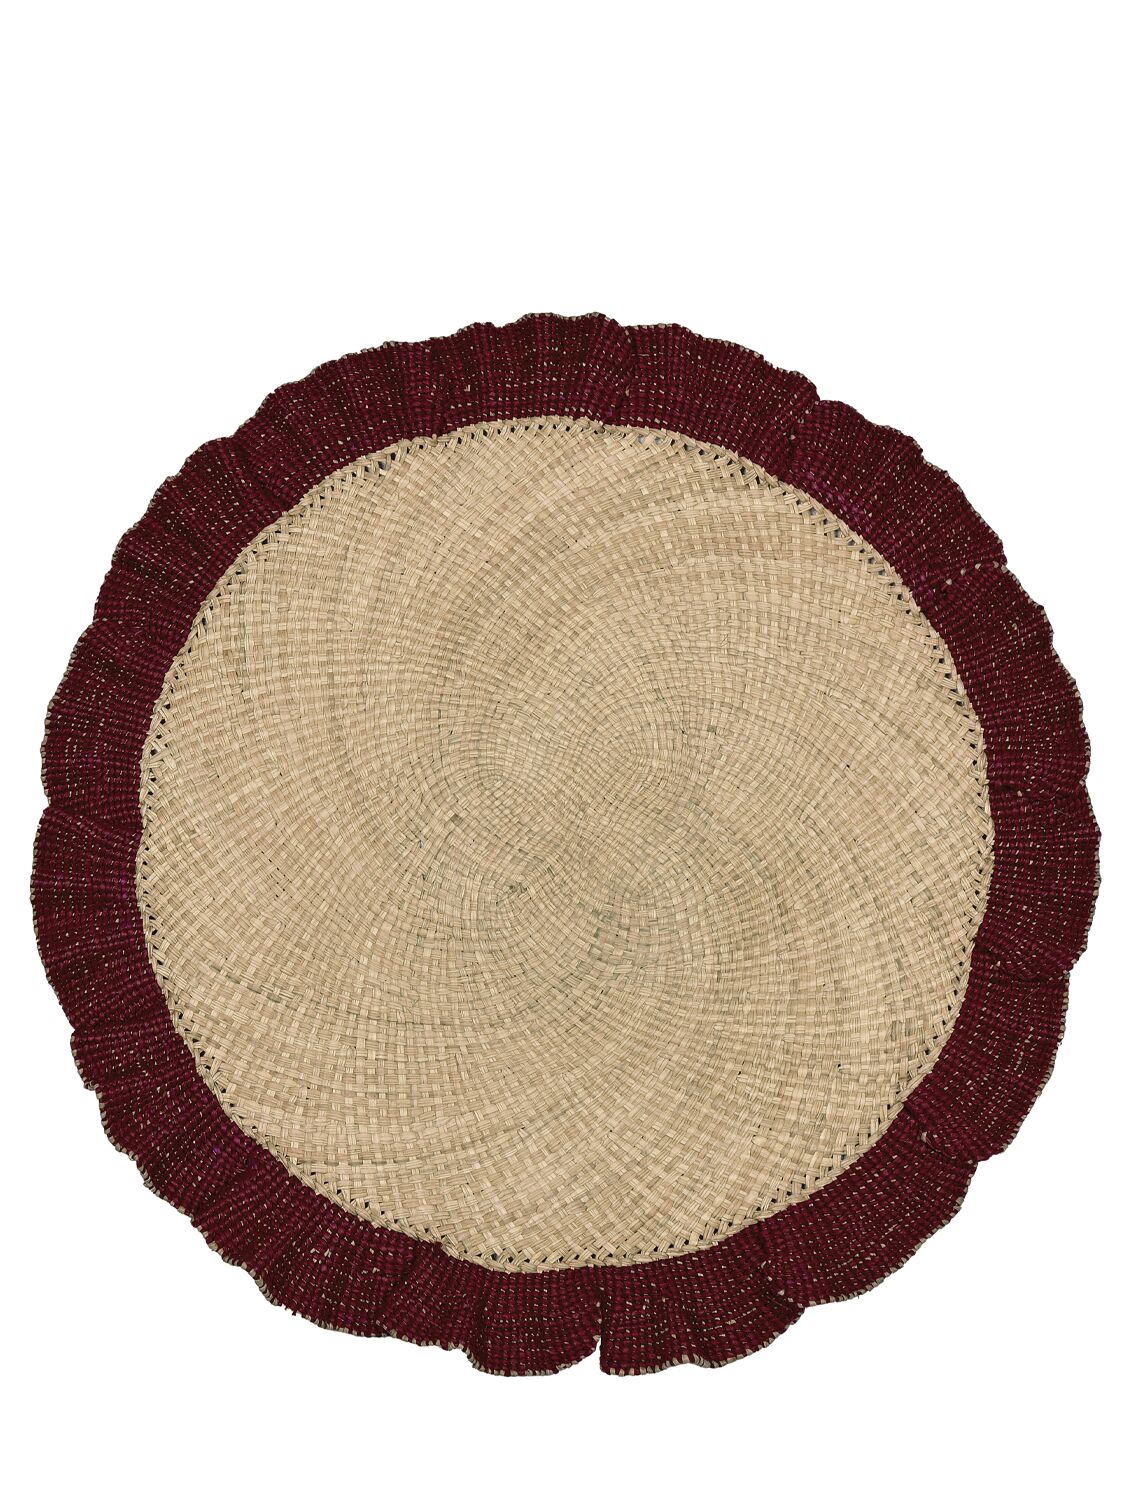 Image of Set Of 2 Iraca Palm Placemats